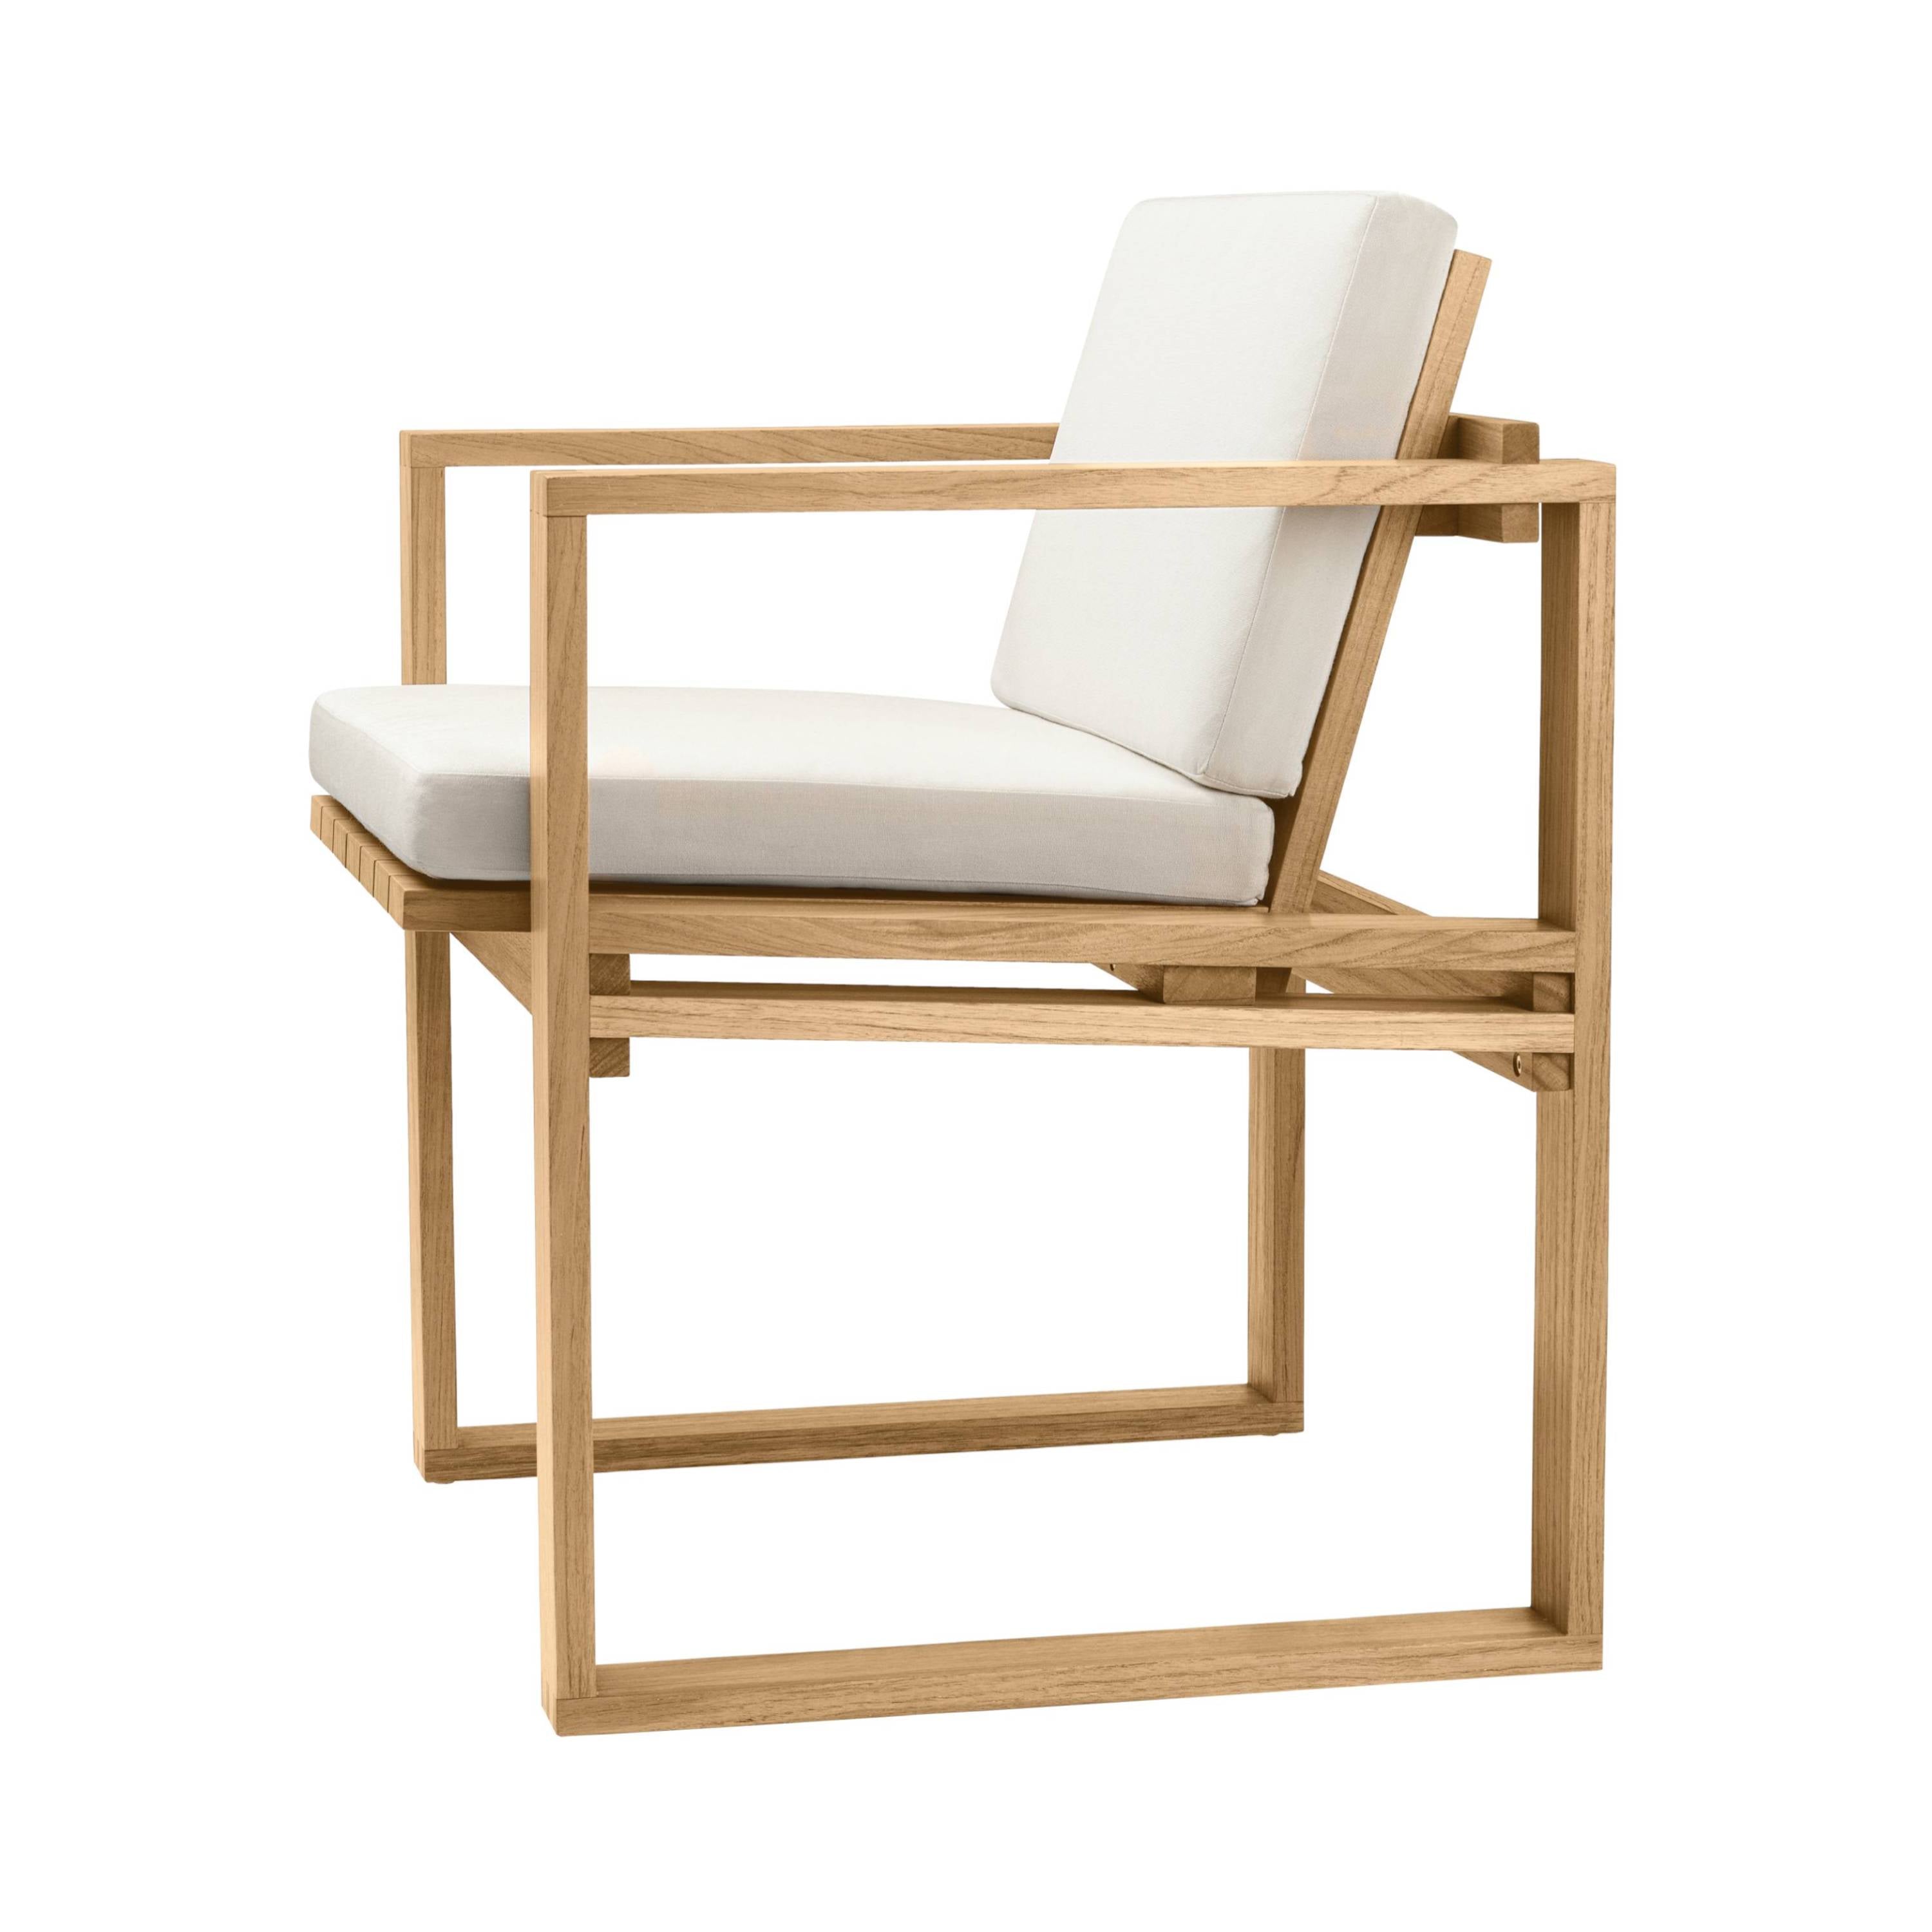 BK10 Outdoor Dining Chair: With Canvas Cushion